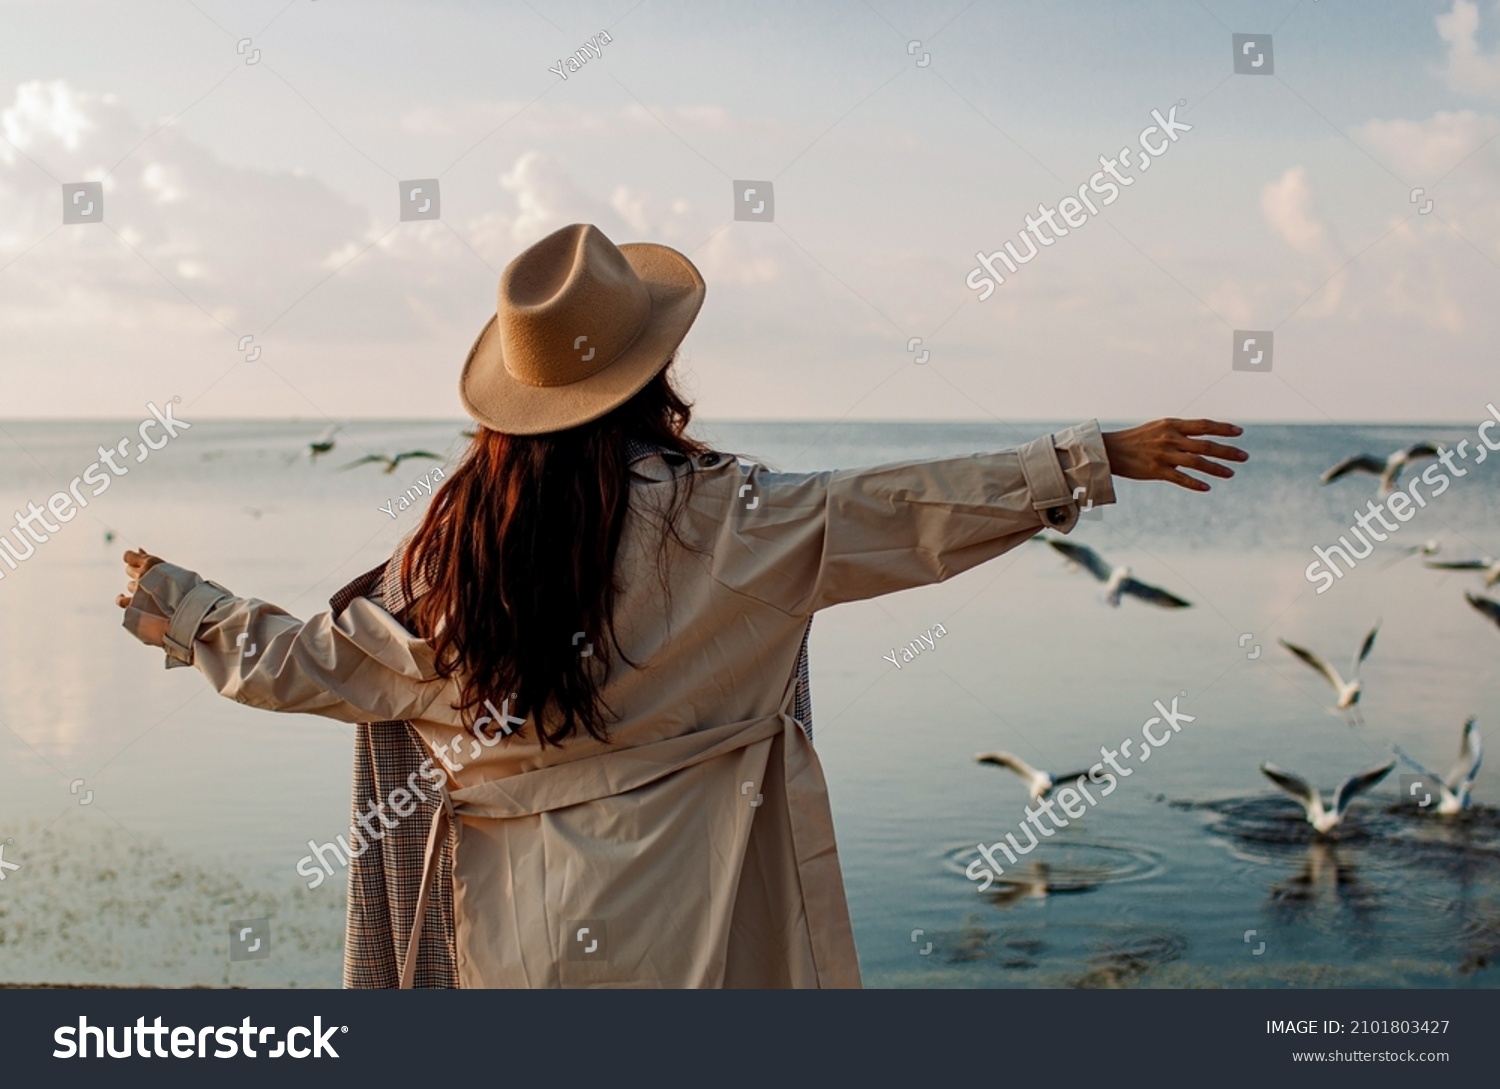 Young woman feeds seagulls at winter sea beach. Amazing coastline scene with girl. Concept of freedom, travel, flying. Lifestyle moment. #2101803427